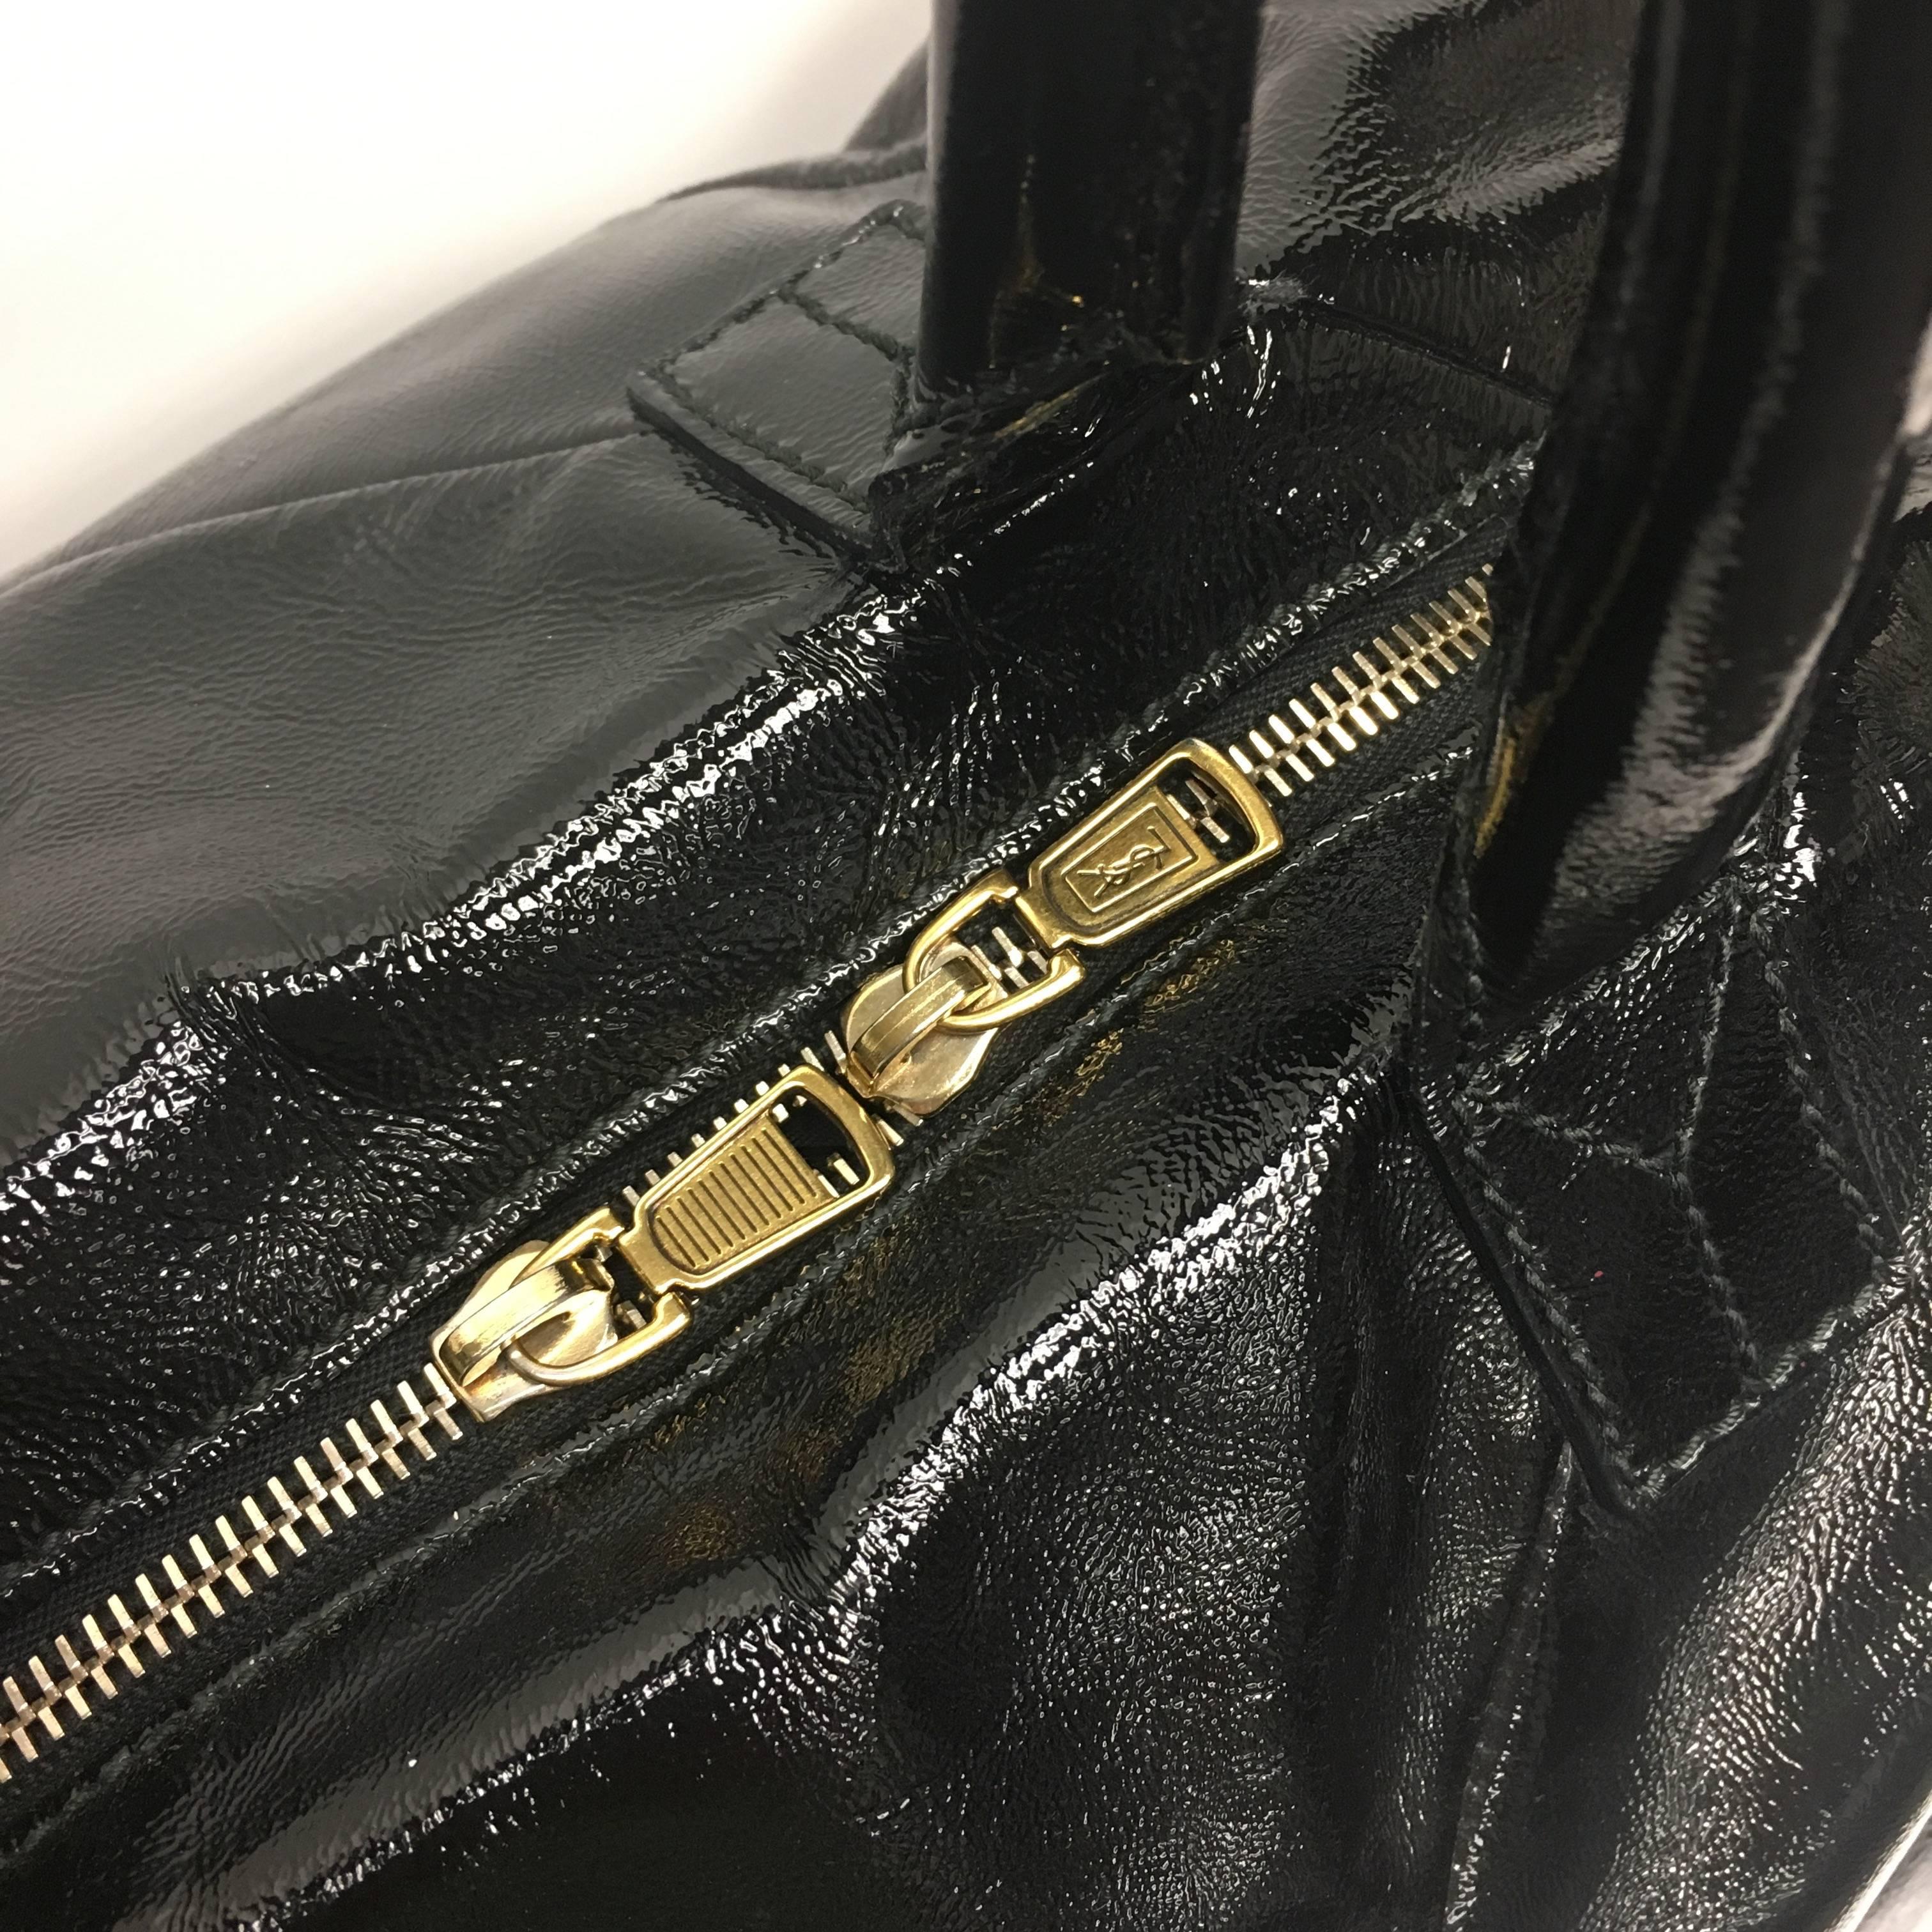 The Easy Y Satchel bag is perfect for your everyday looks. Crafted from black patent leather, this modern, daring bag features leather dual-rolled handles, frontal Y design detail, protective base studs, cinched side button tabs creating a duffle